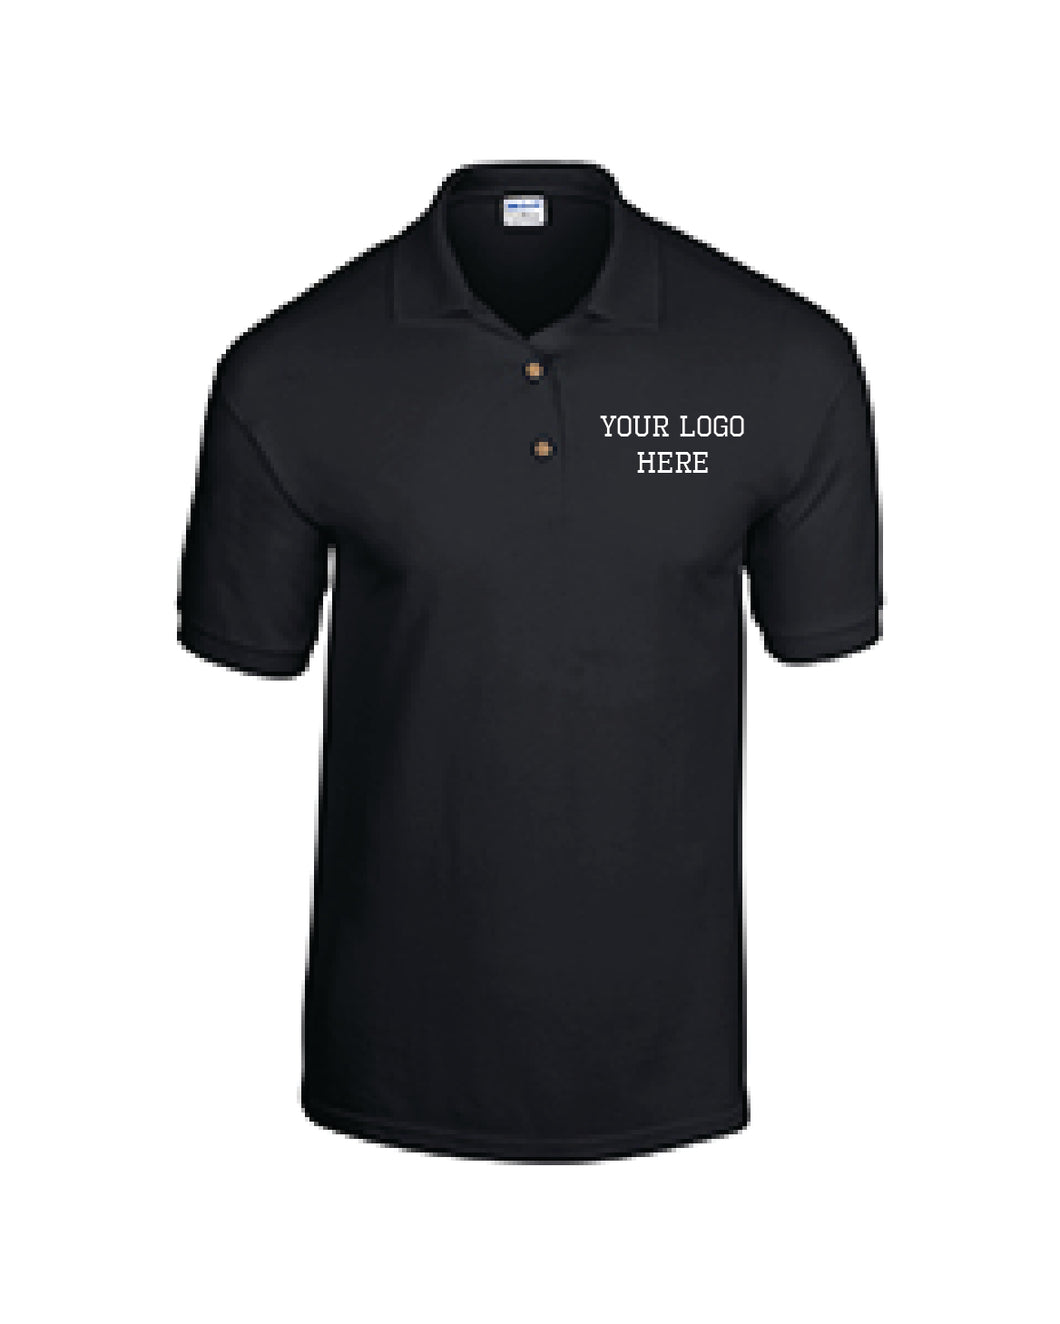 1 Location Embroidered Polo Shirt